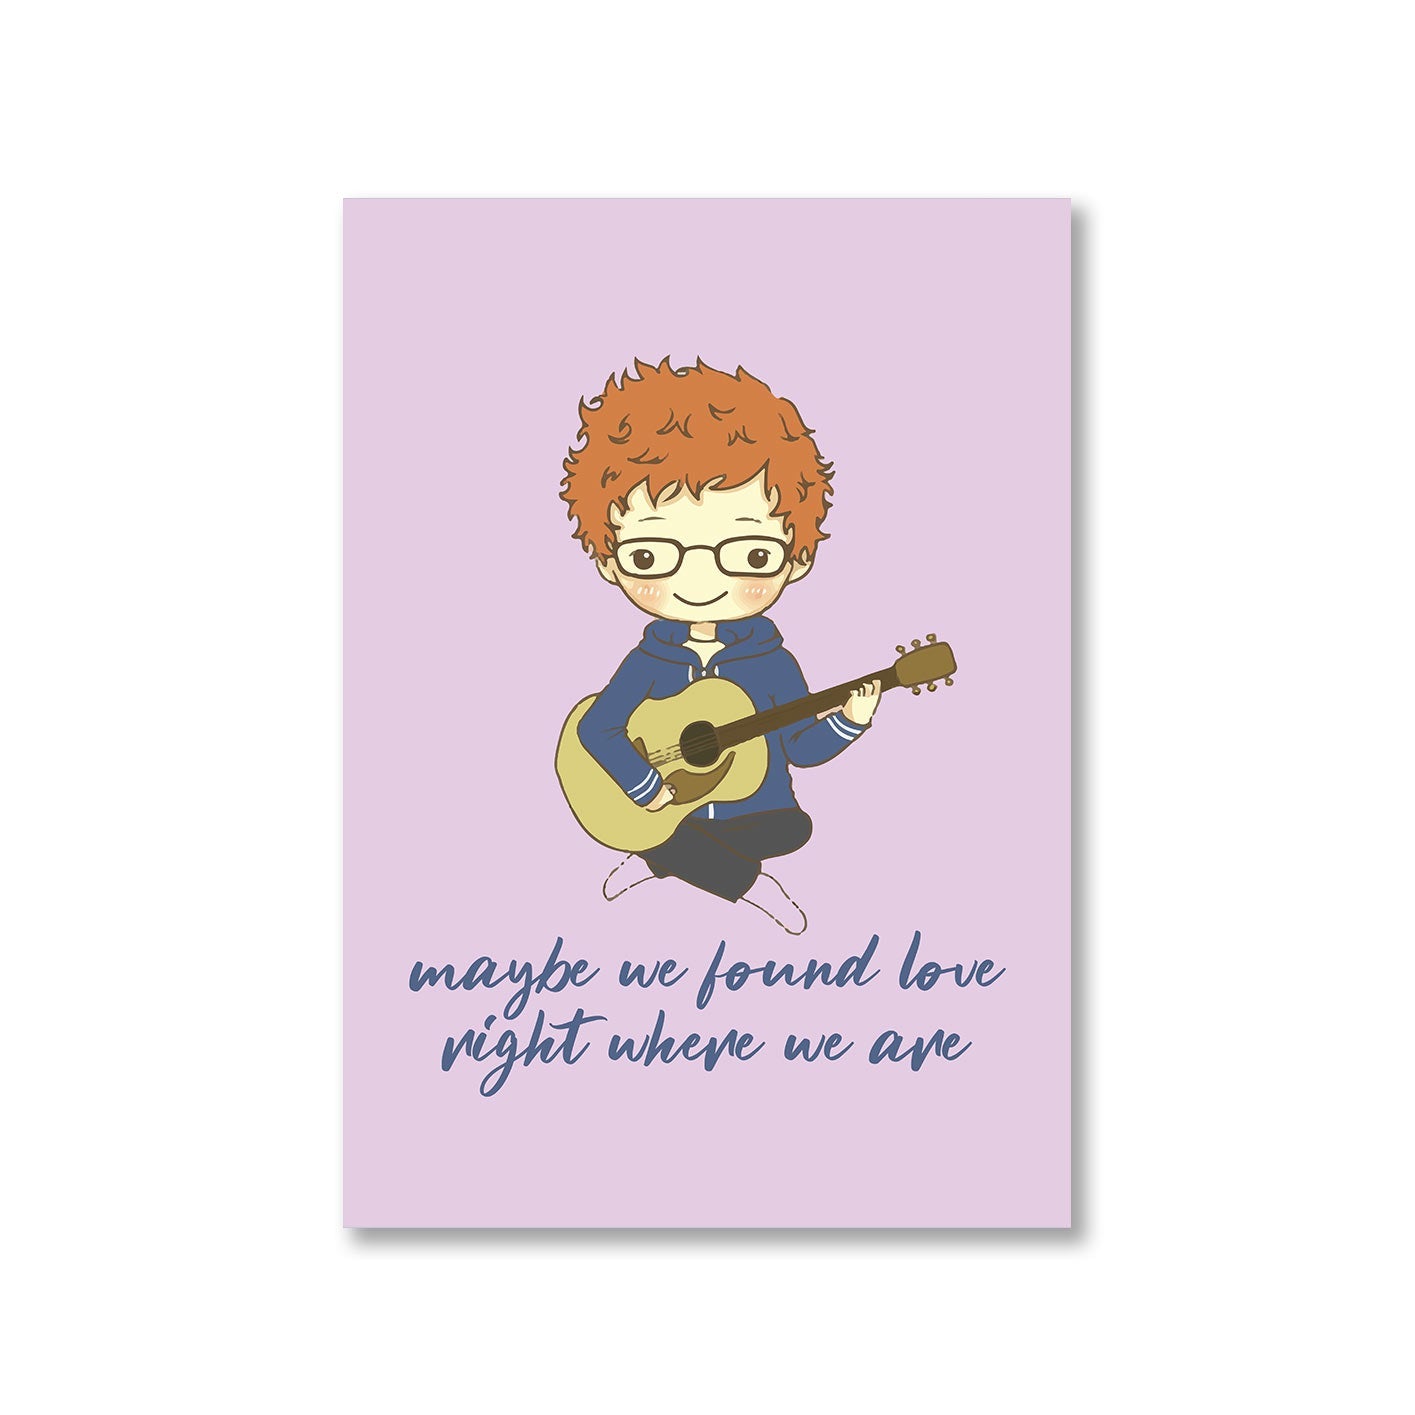 ed sheeran thinking out loud poster wall art buy online india the banyan tee tbt a4